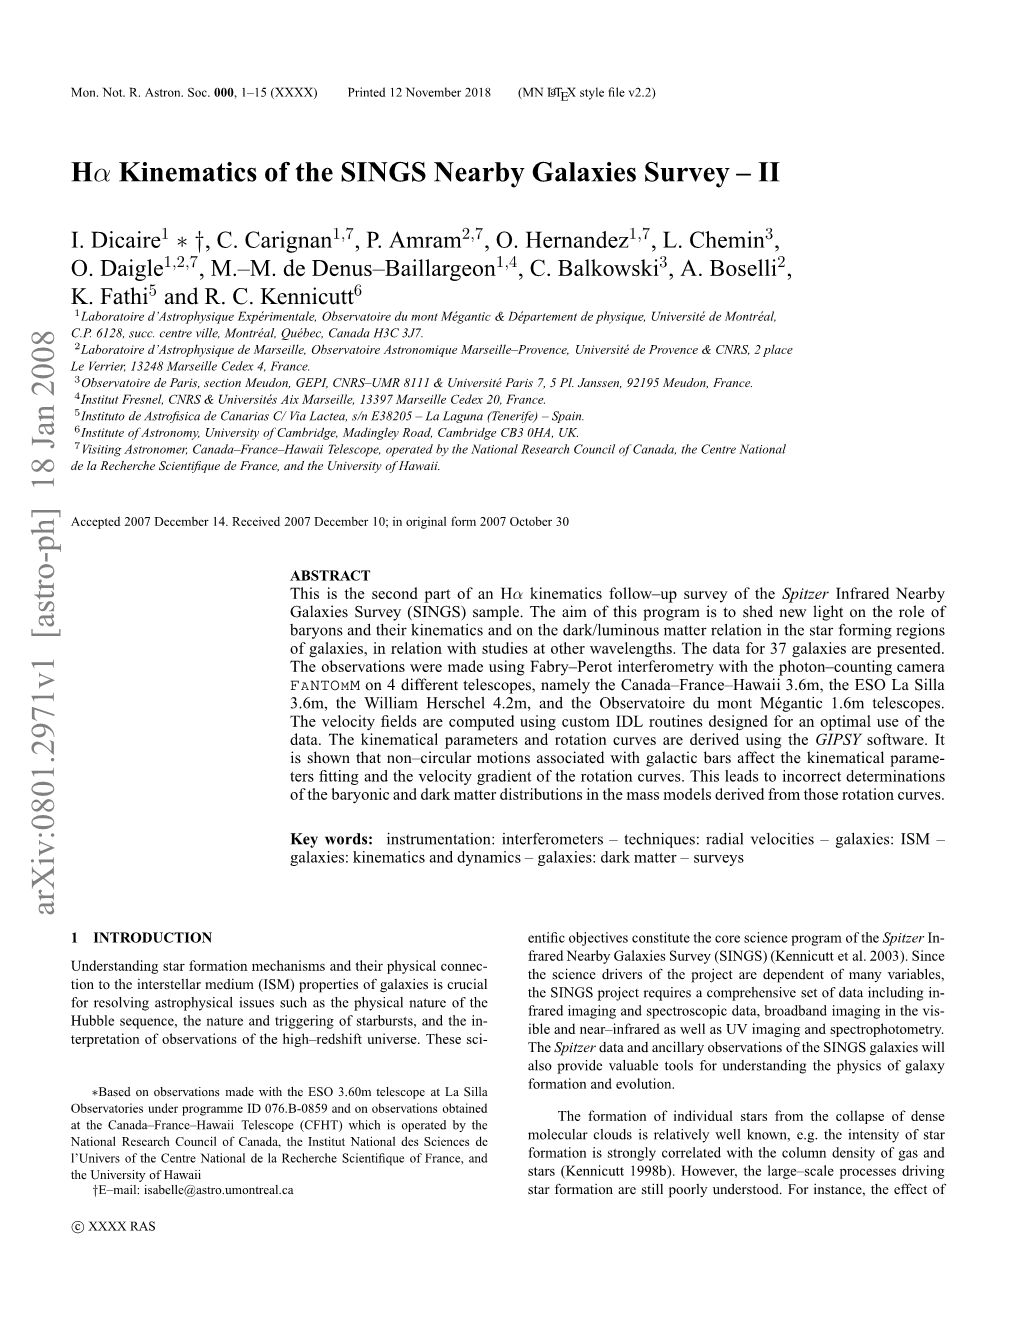 Hα Kinematics of the SINGS Nearby Galaxies Survey – II